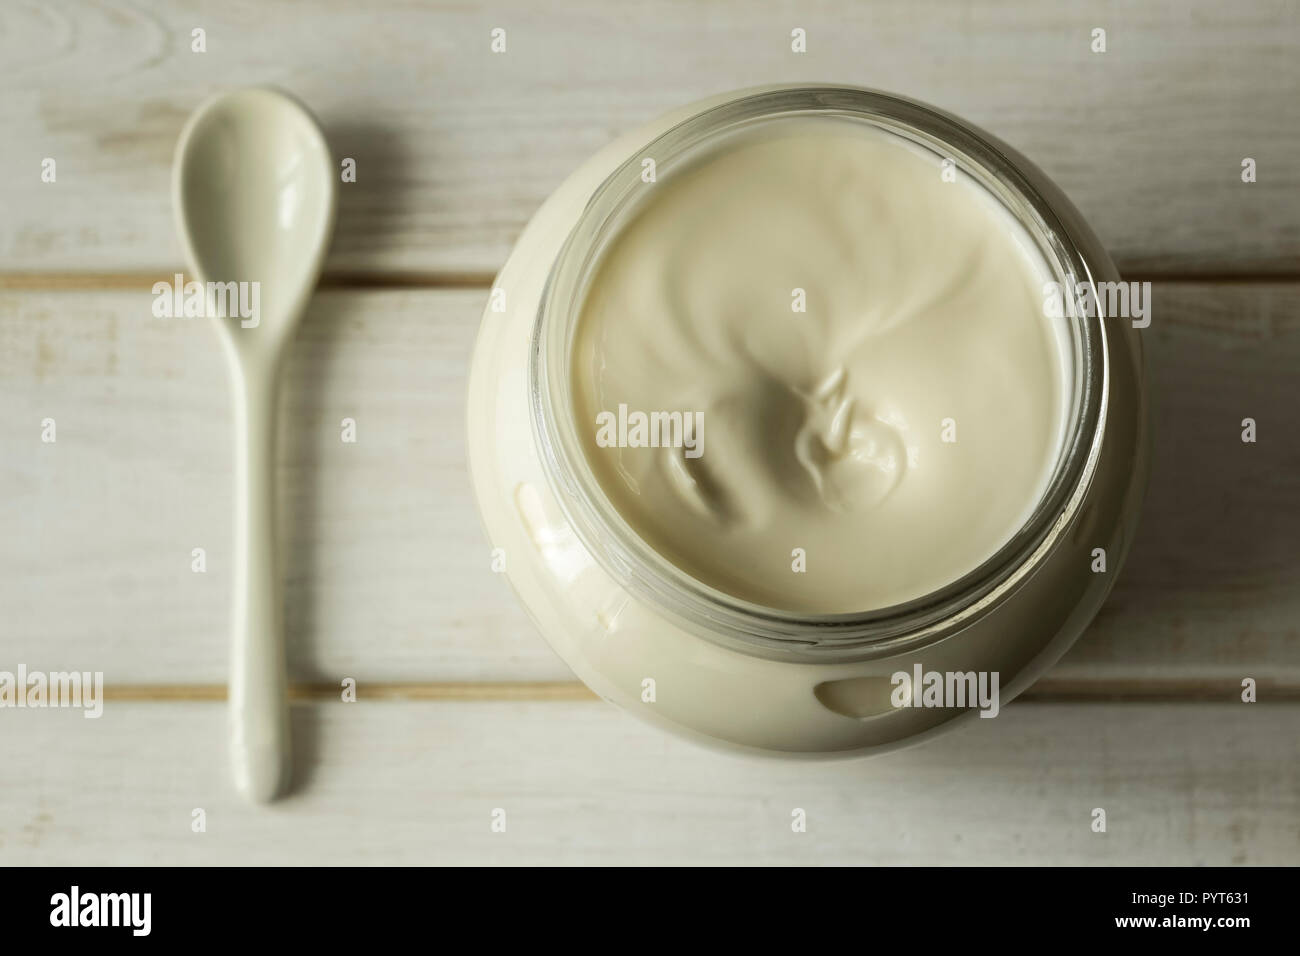 Mayonnaise in a glass jar with a spoon on white wooden boards. Stock Photo